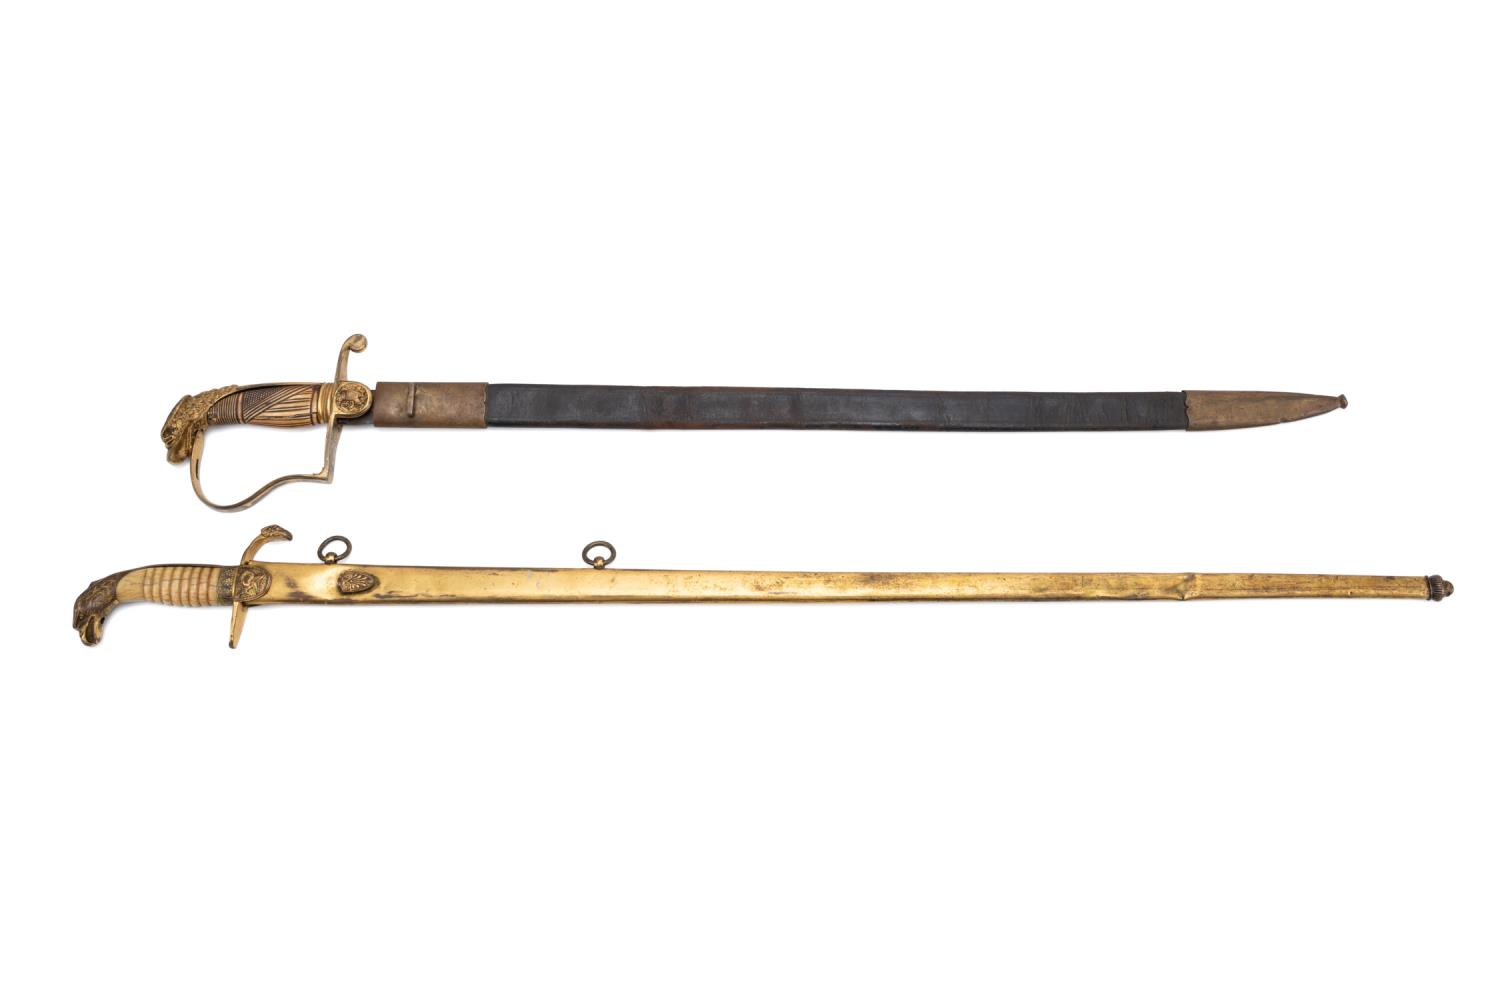 TWO EAGLE HEAD OFFICER'S SWORDS